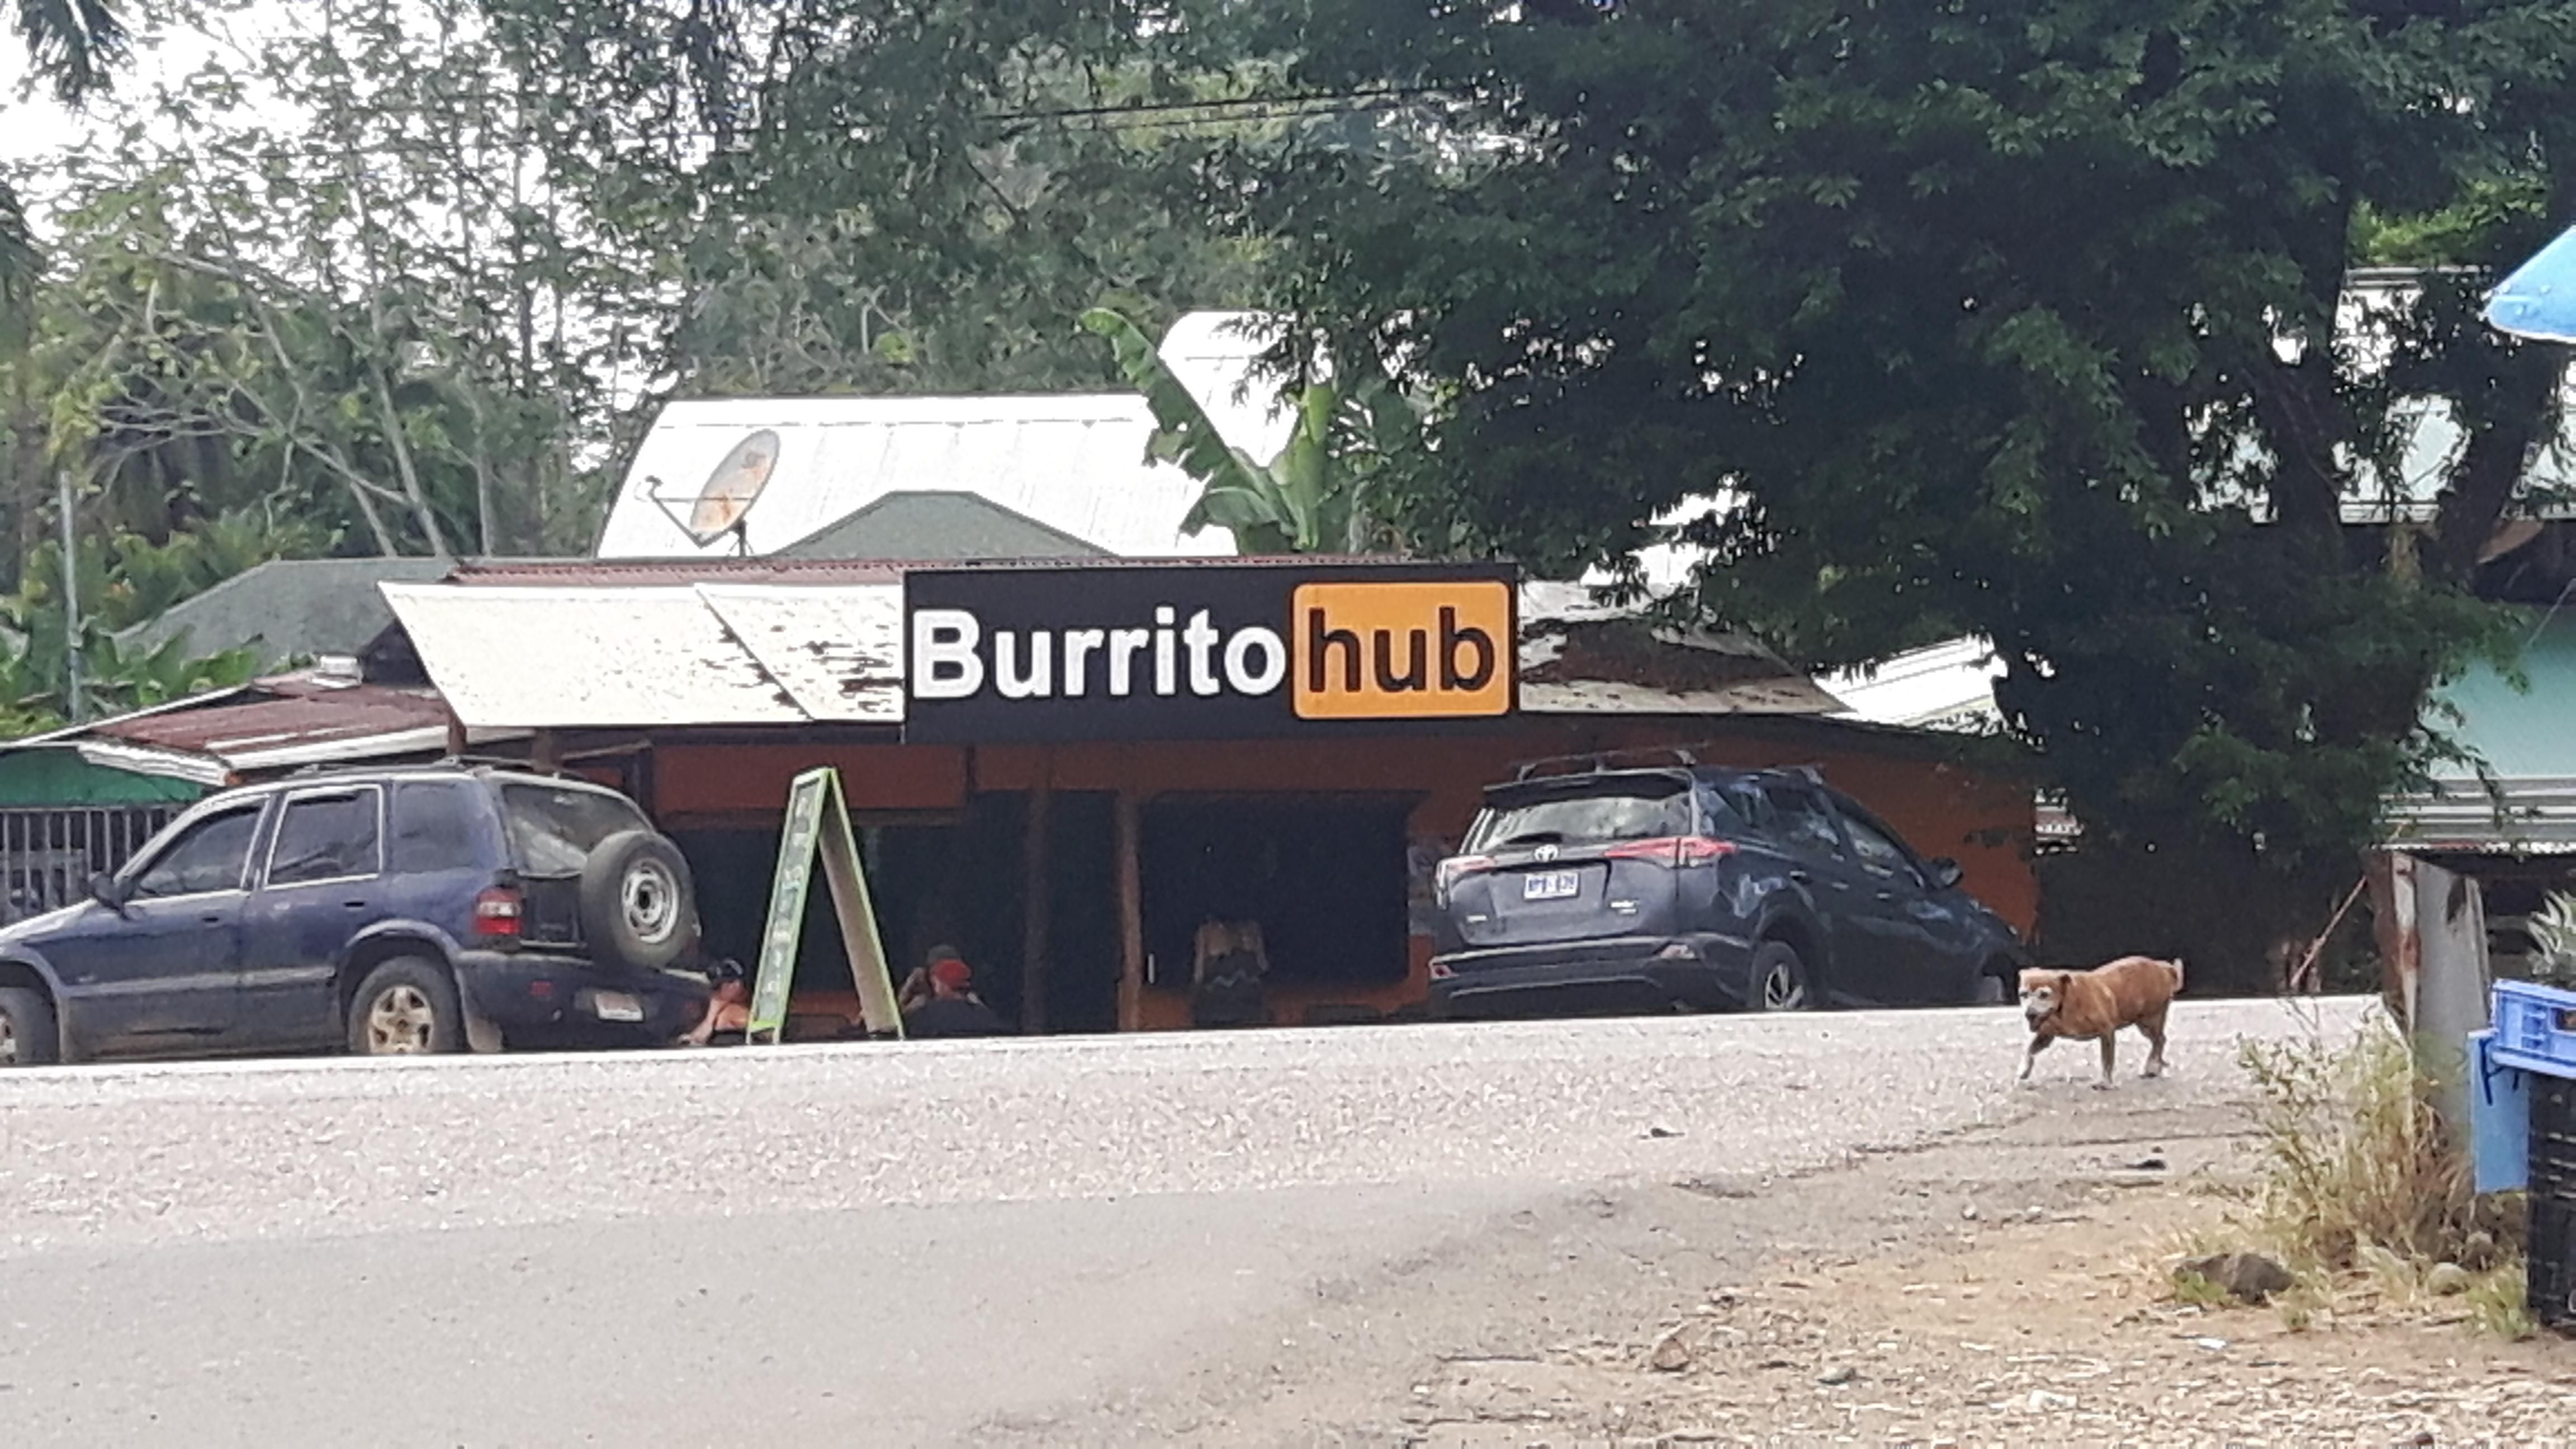 So I found this restaurant in Costa Rica, I just had to laugh.